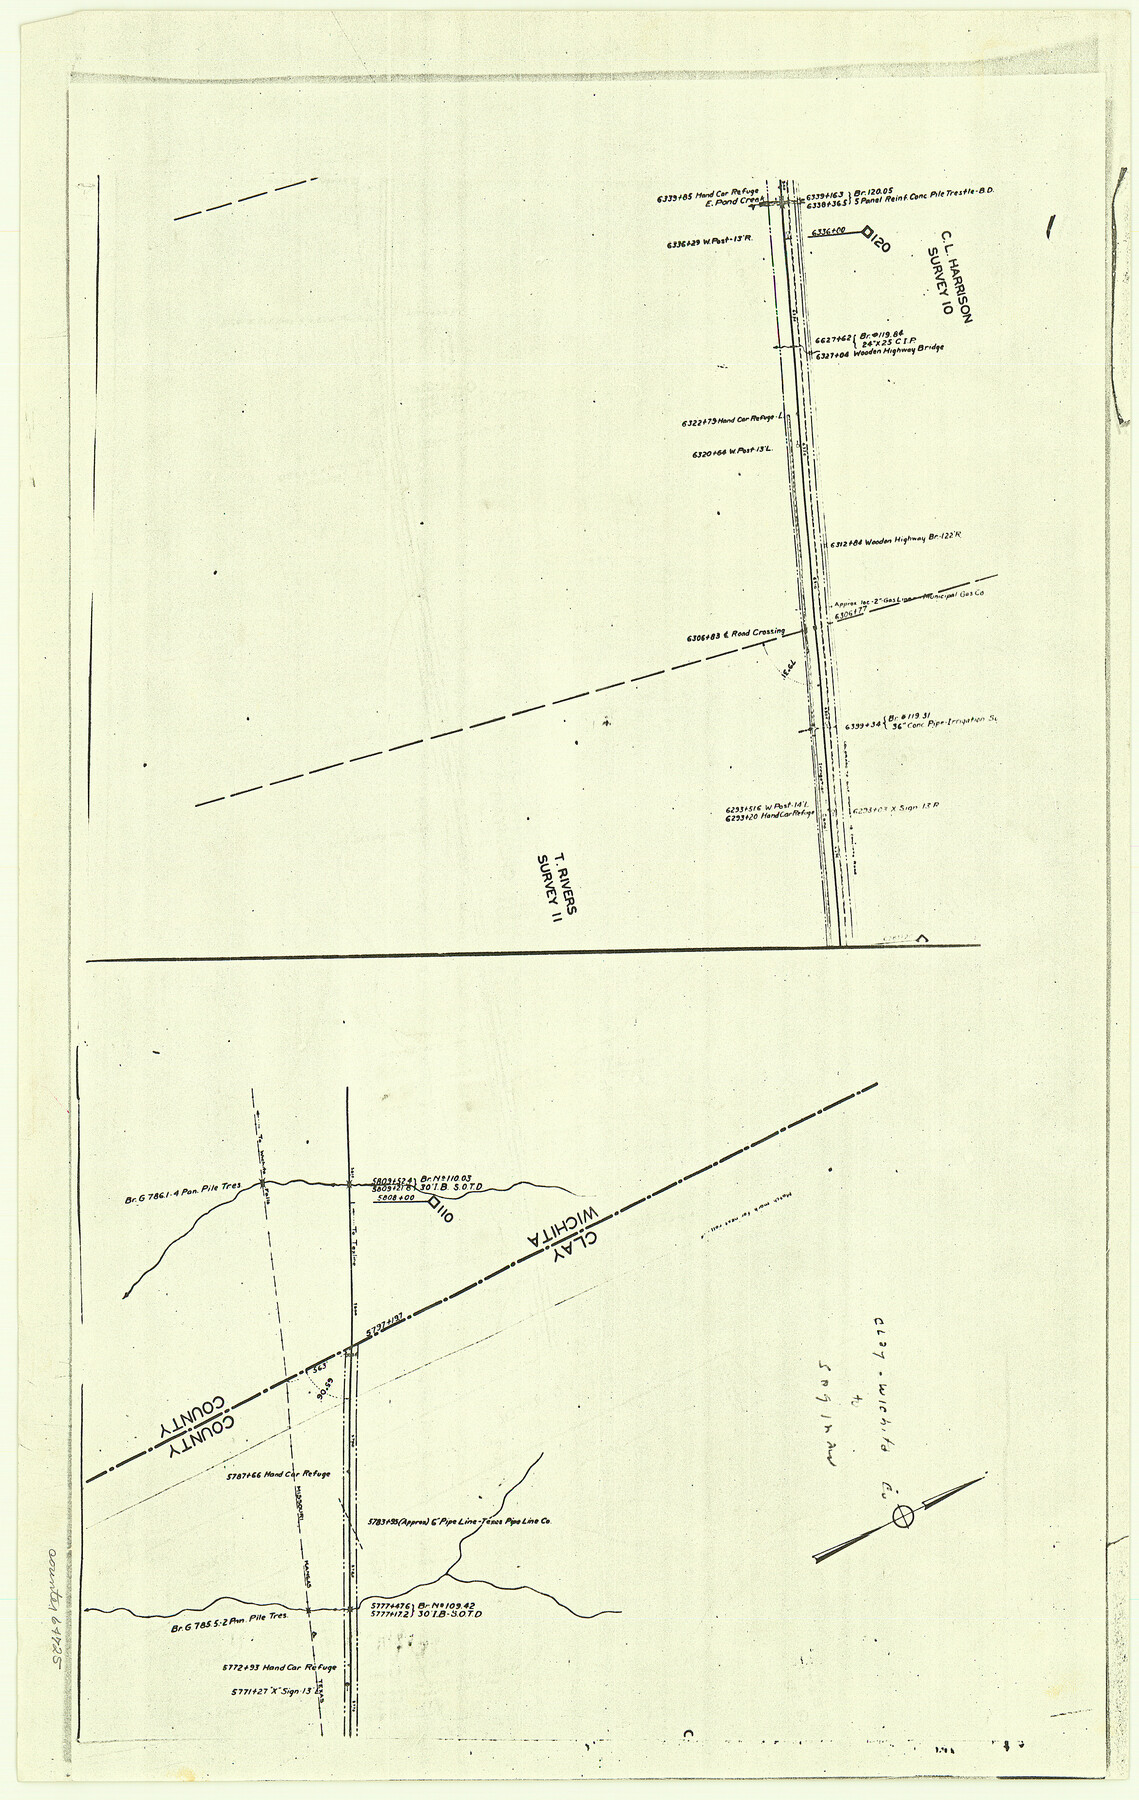 64725, [F. W. & D. C. Ry. Co. Alignment and Right of Way Map, Clay County], General Map Collection